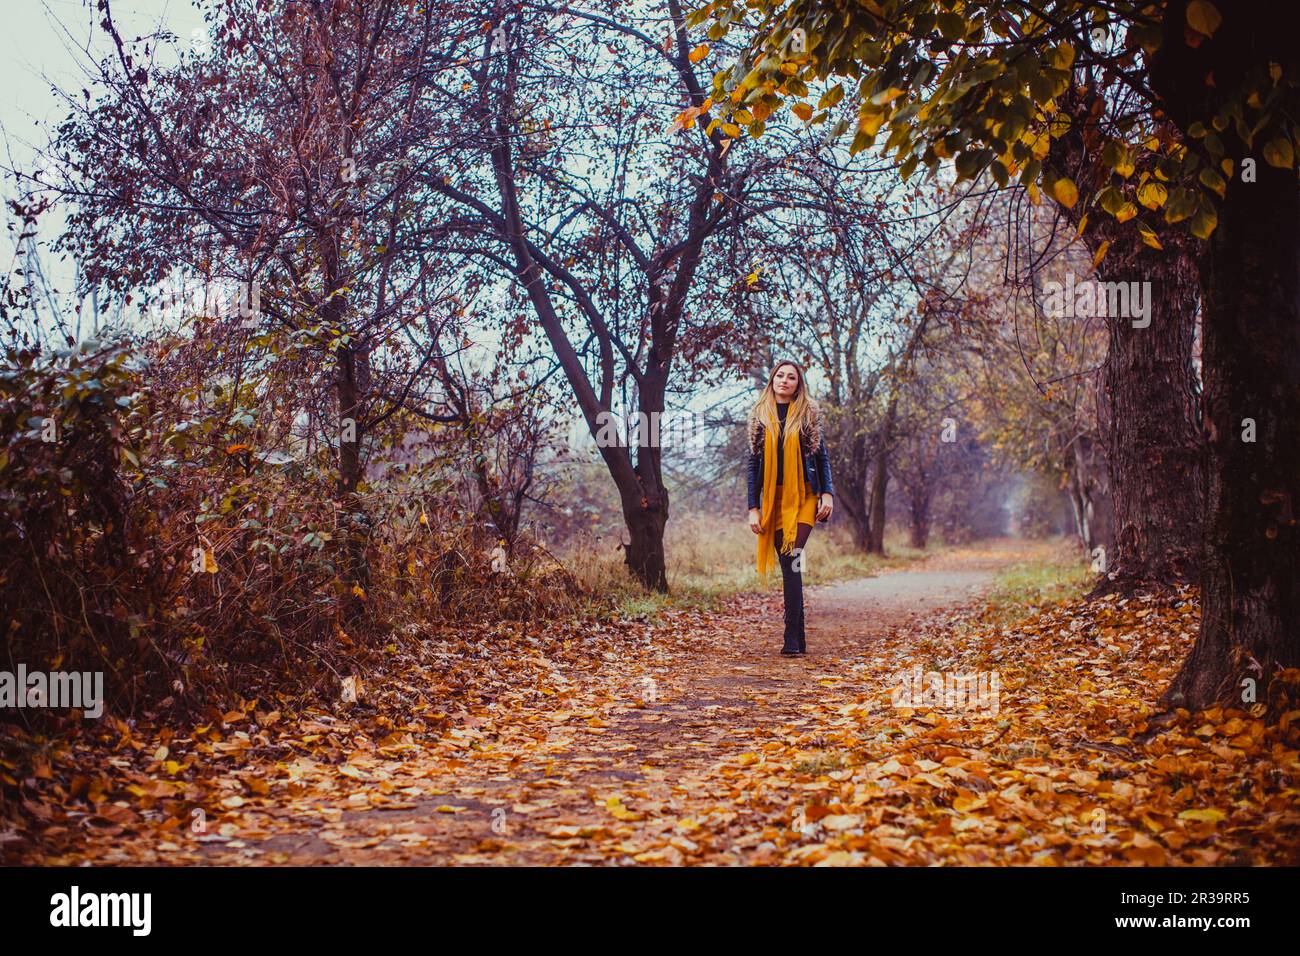 Woman walking in autumn park. Stylish girl wears black leather jacket, yellow dress and scarf outdoors. Stock Photo